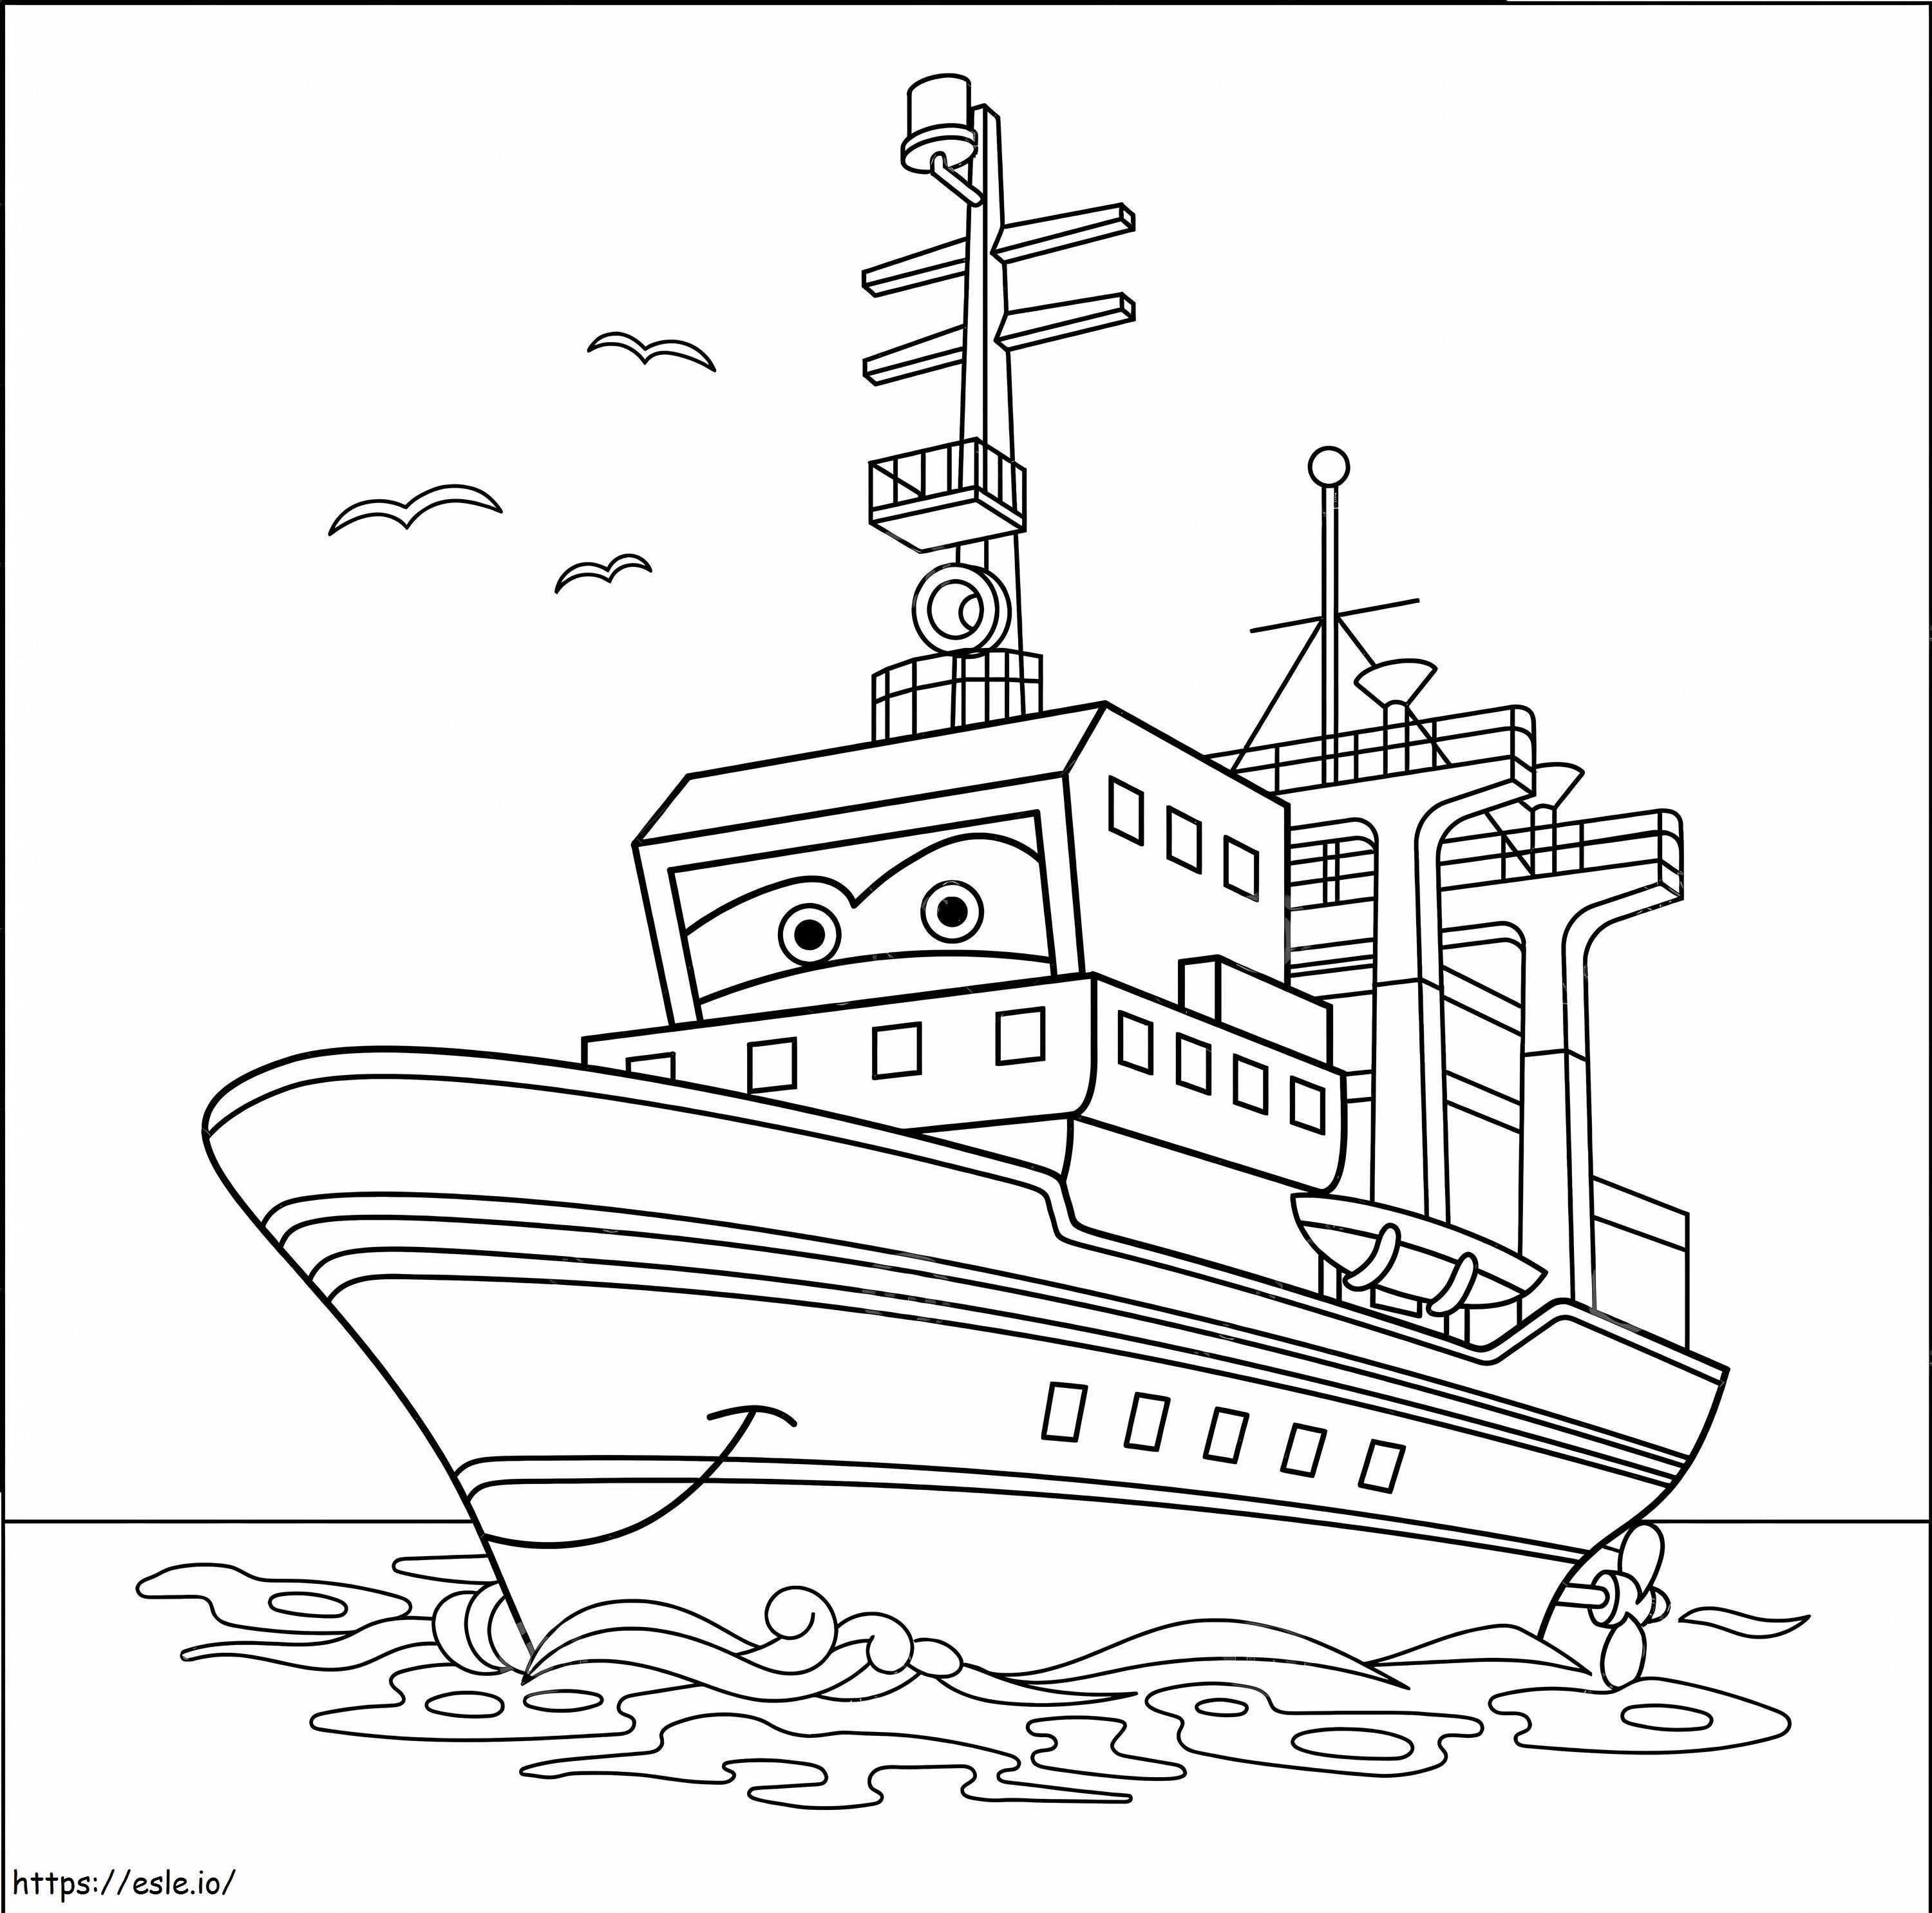 Cartoon Boat Smiling coloring page